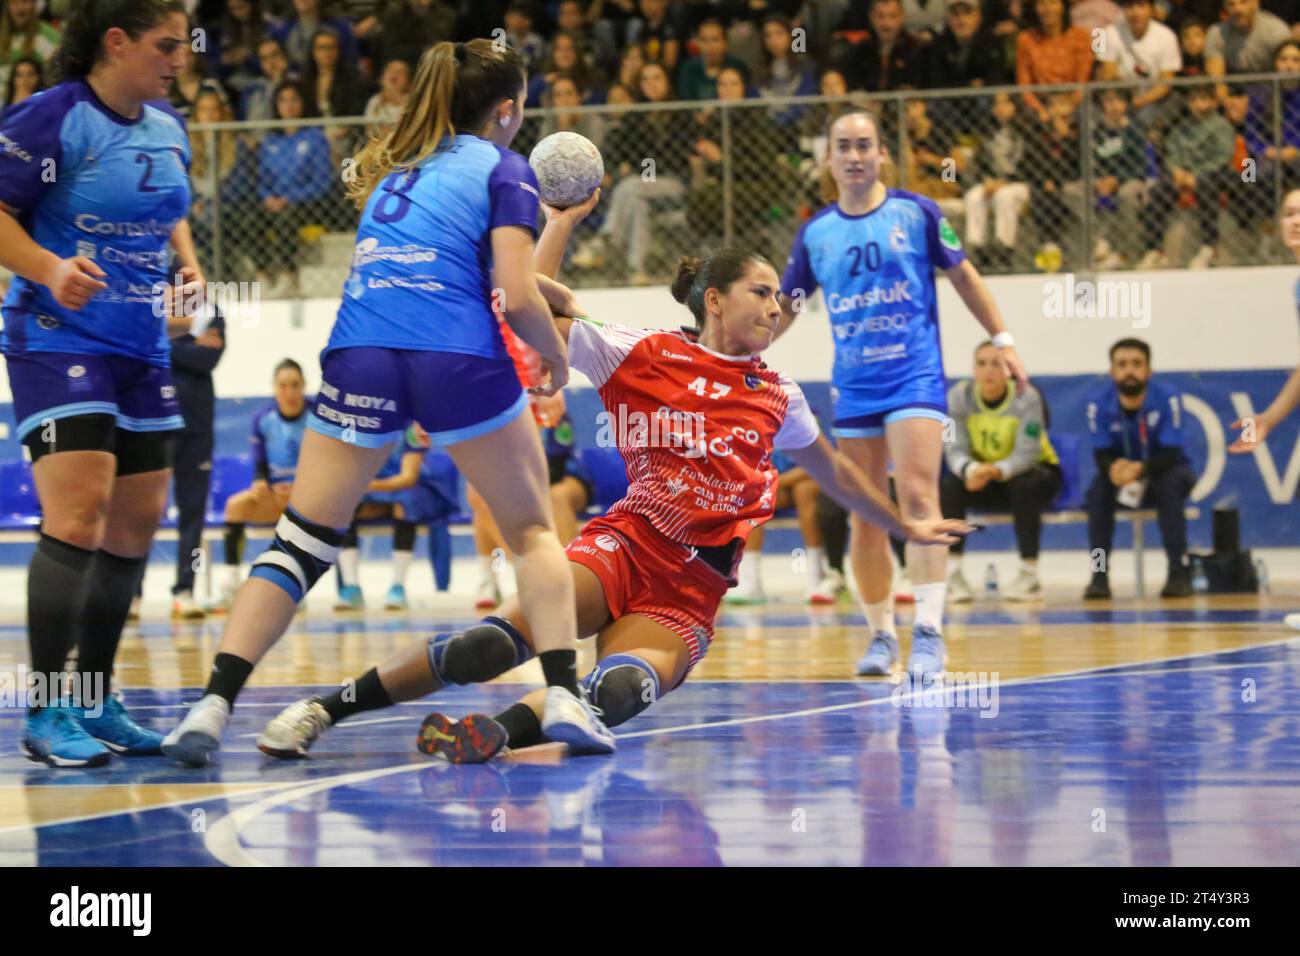 Oviedo, Spain. 1st Nov, 2023. Motive.co Gijon Balonmano La Calzada player, Nayla de Andres (47) shoots on goal during the 9th Matchday of the Liga Guerreras Iberdrola between Lobas Global Atac Oviedo and Motive.co Gijon La Calzada Handball, on November 1, 2023, at the Florida Arena Municipal Sports Center, in Oviedo, Spain. (Photo by Alberto Brevers/Pacific Press) Credit: Pacific Press Media Production Corp./Alamy Live News Stock Photo